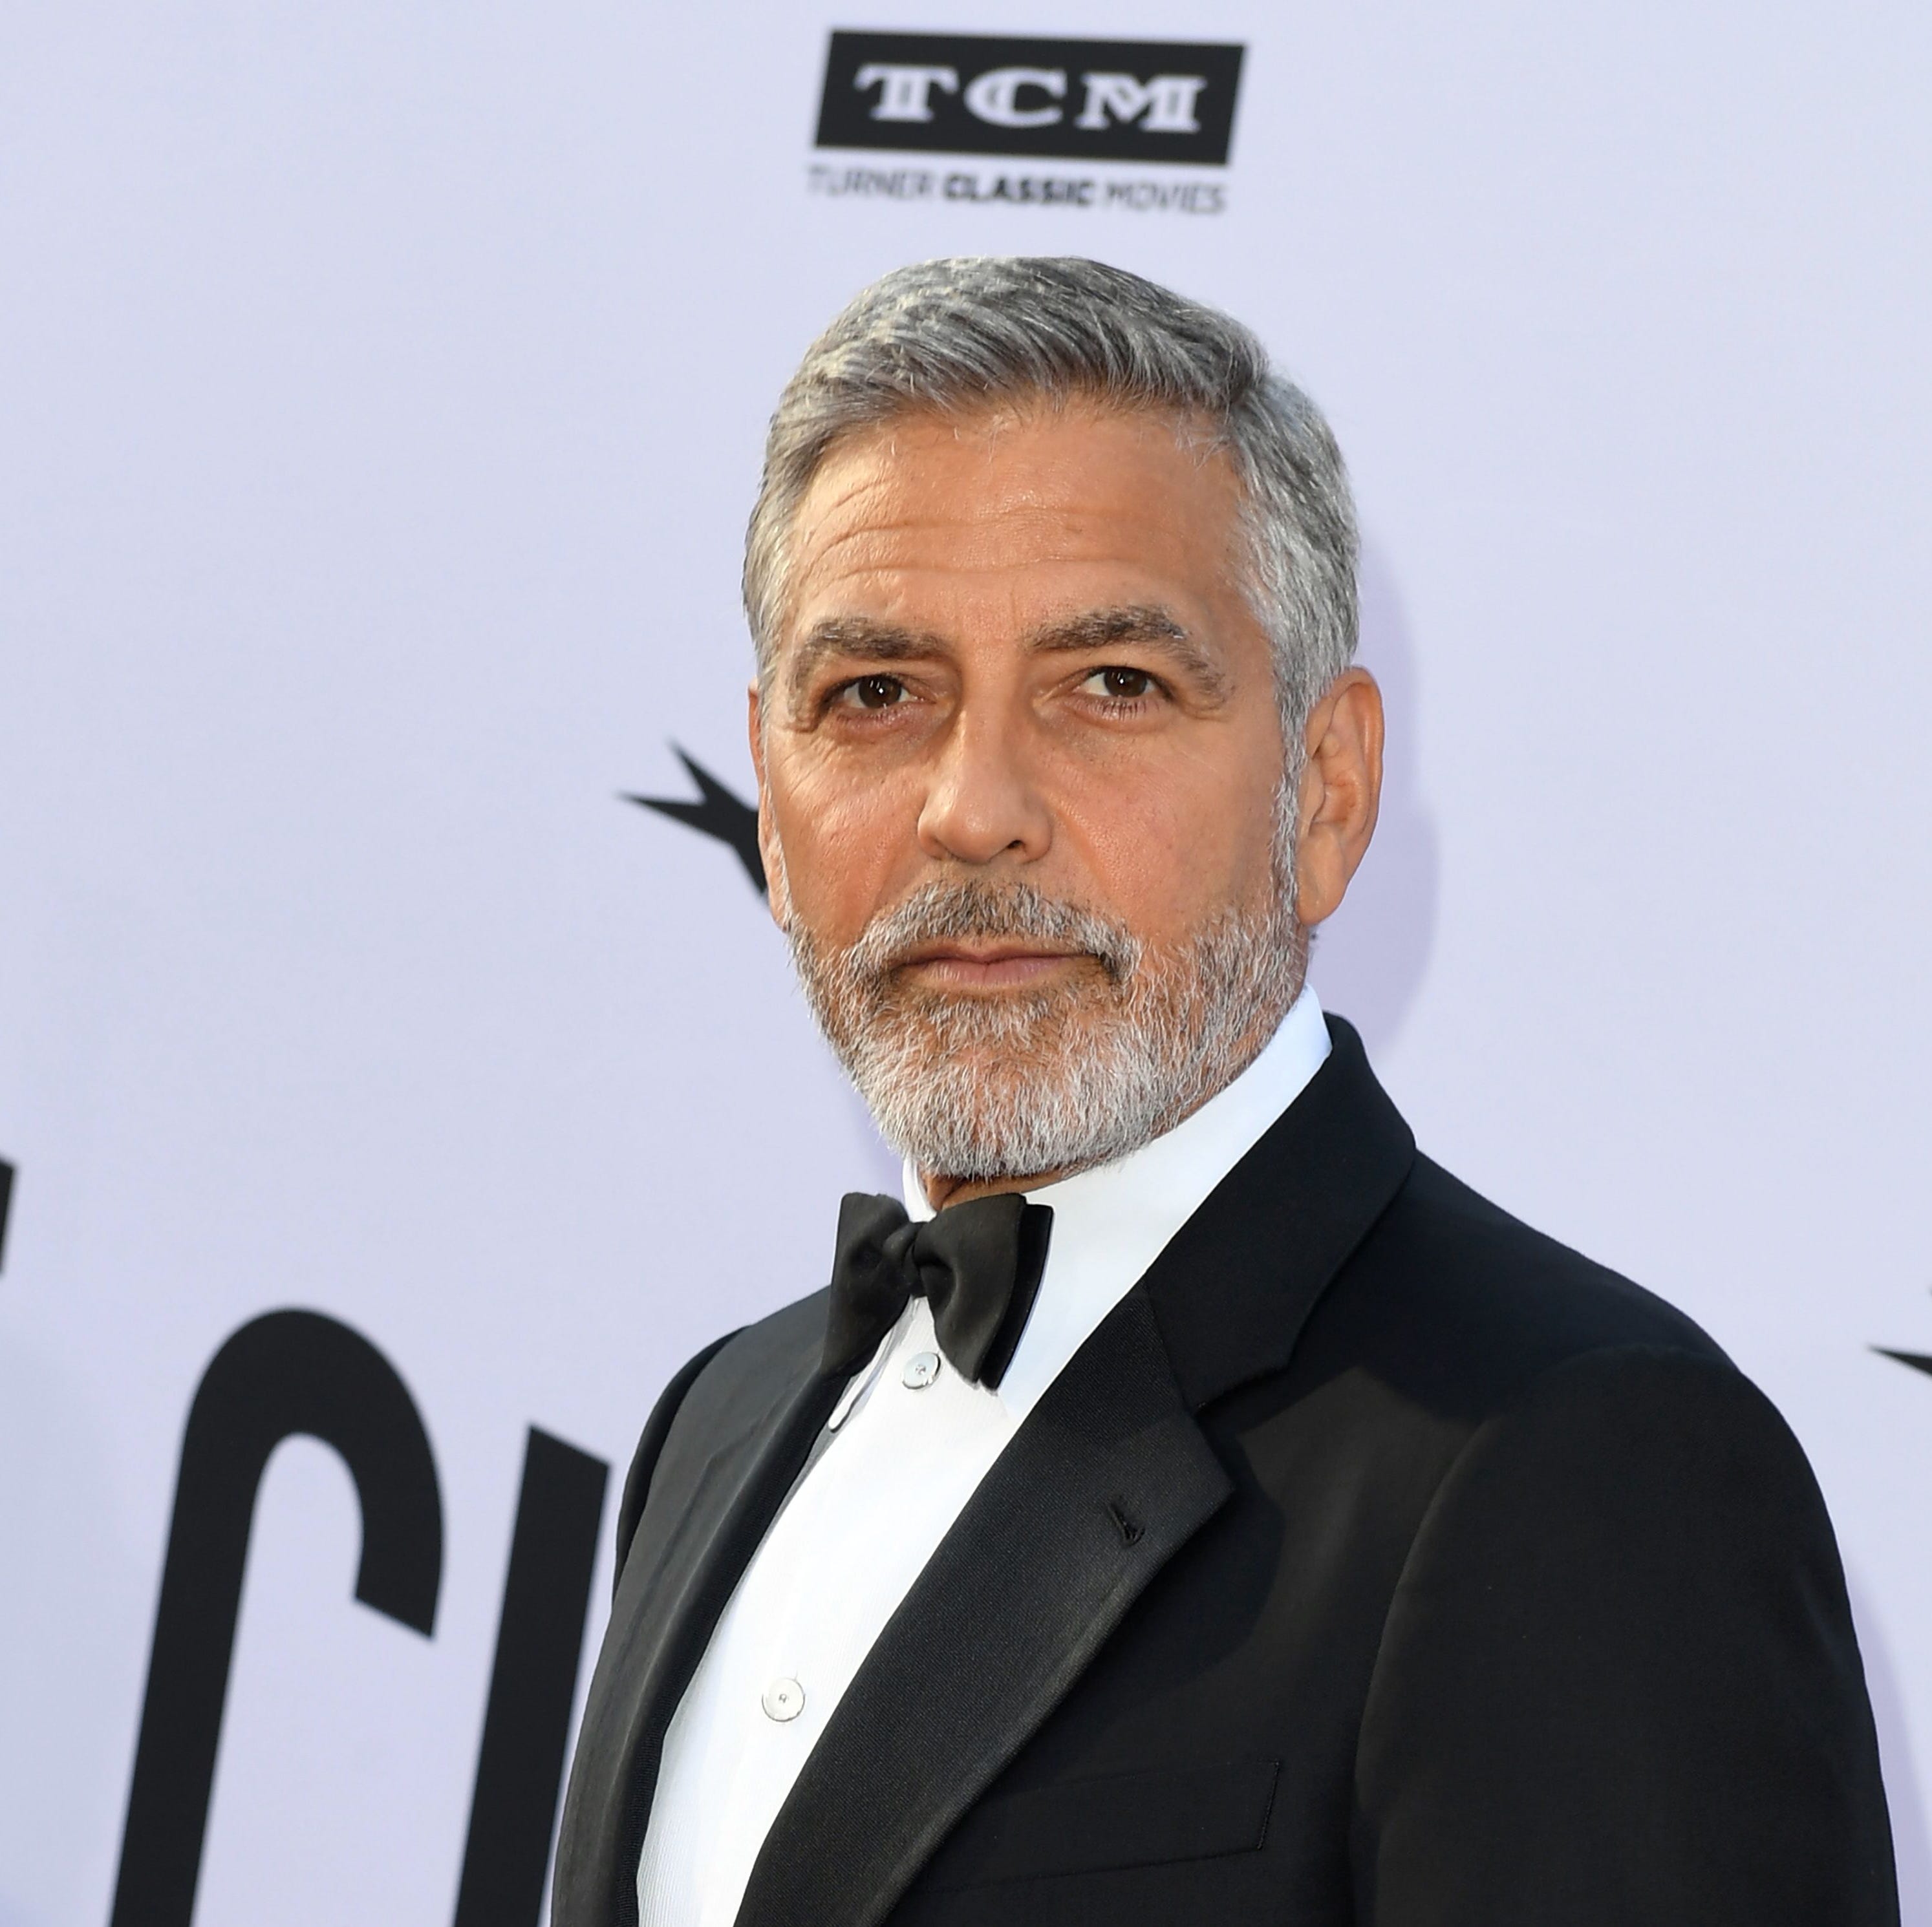 George Clooney tops Forbes' 2018 list of top male earners with $239 million in pretax earnings between June 1, 2017 and June 1, 2018, thanks to tequila. Clooney sold his Casamigos Tequila company to for up to $1 billion dollars. He took home $233 mil